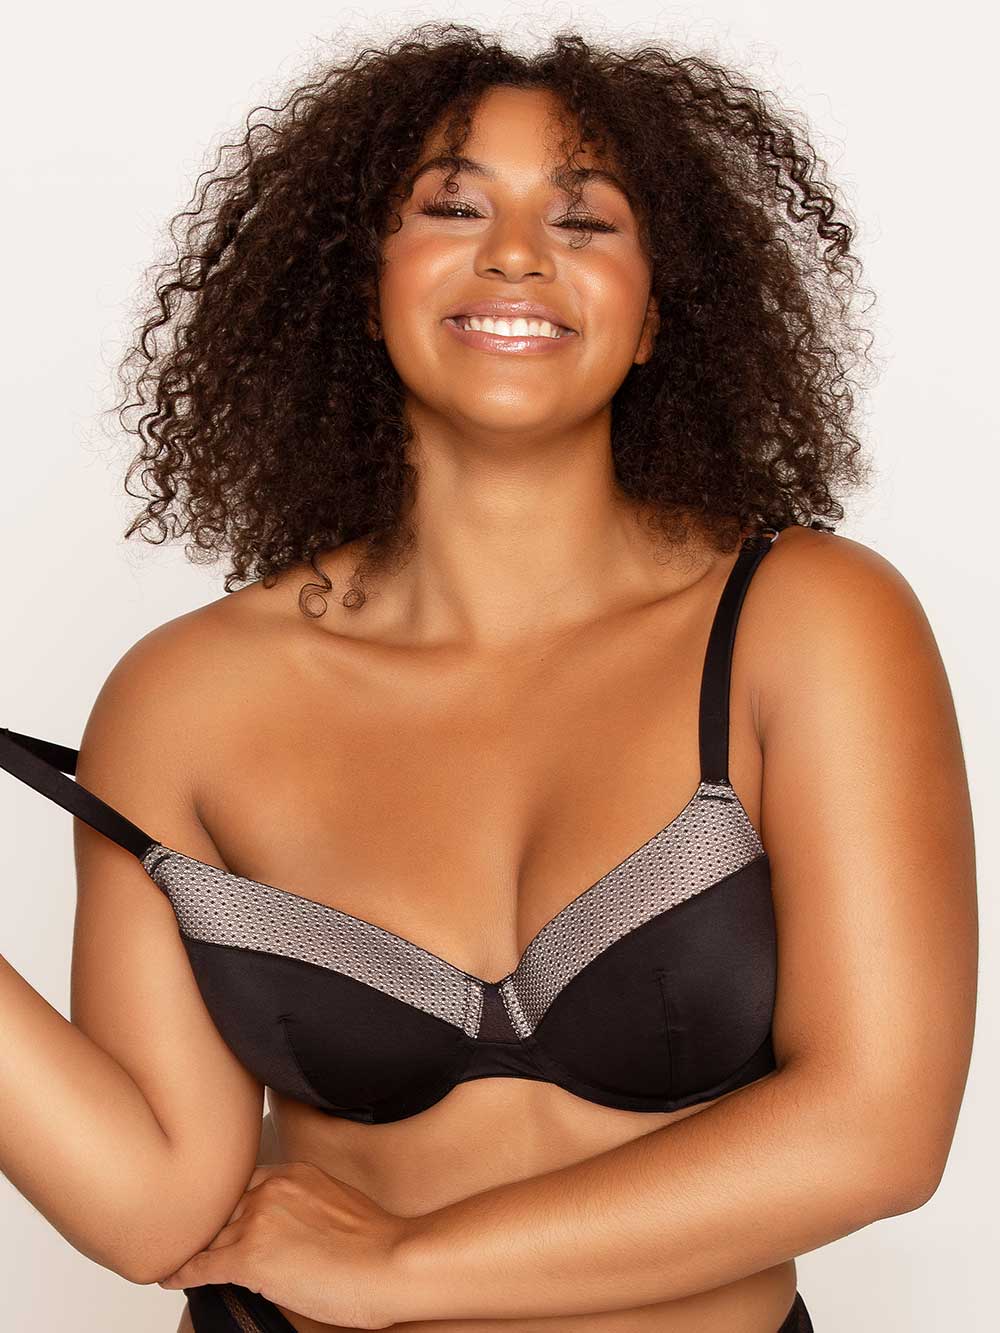 Plus Size Bras, Sexy Bras for Plus Size, Bigger & Full Figure Bras Tagged  Backless Bras - HauteFlair